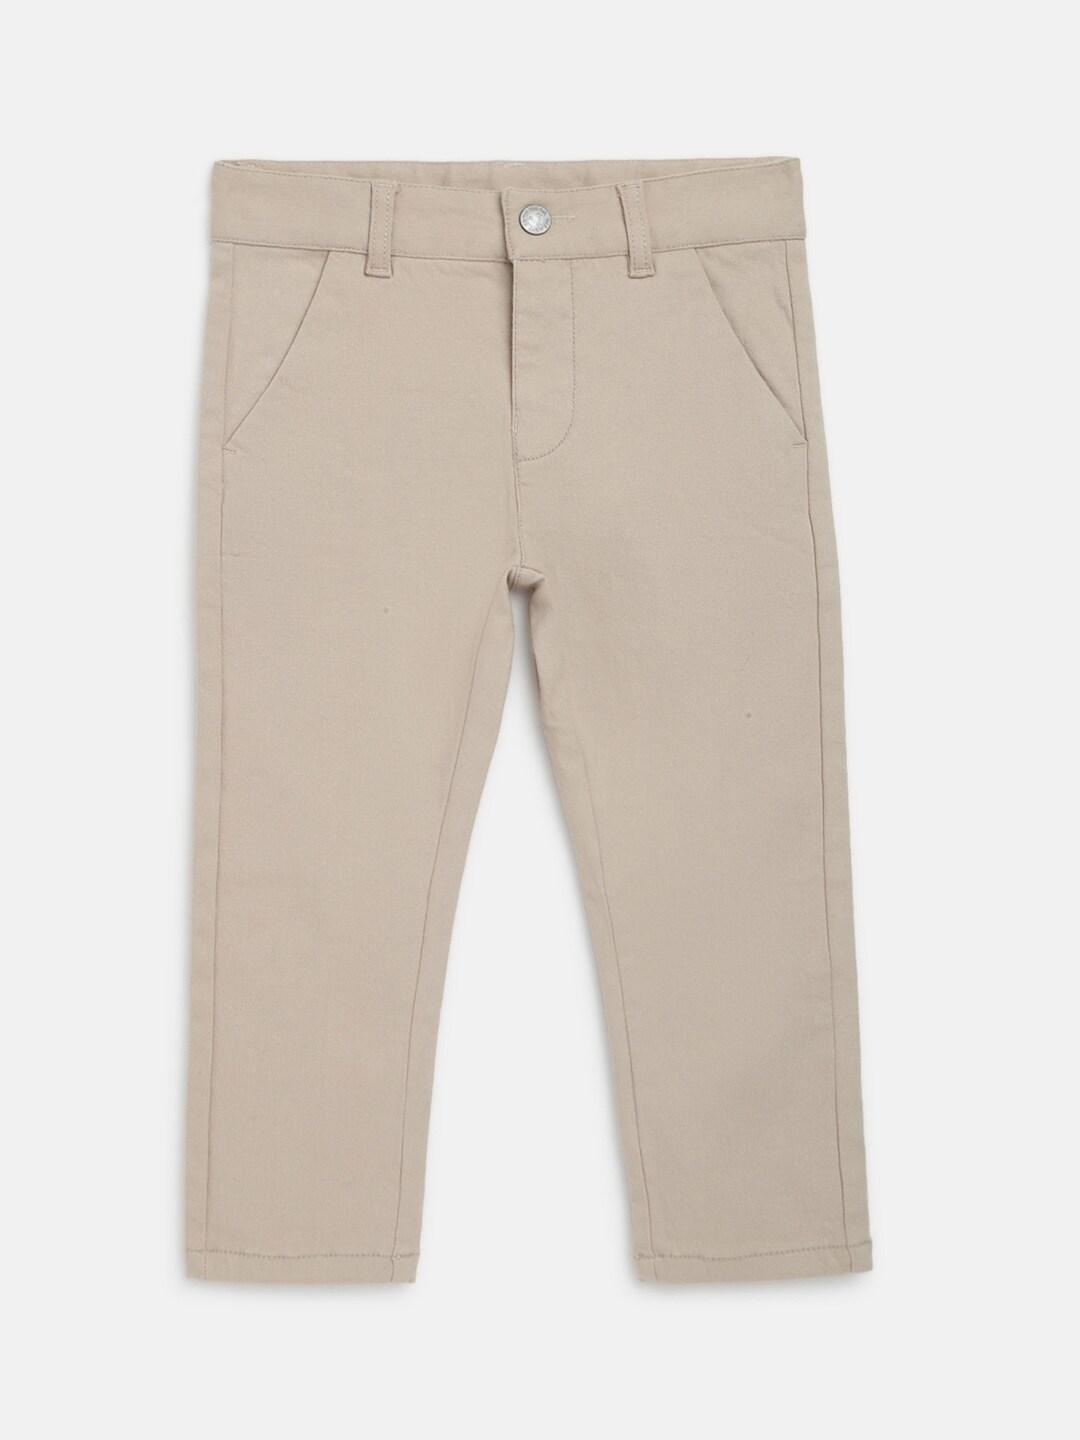 Chicco Boys Comfort Chinos Trousers